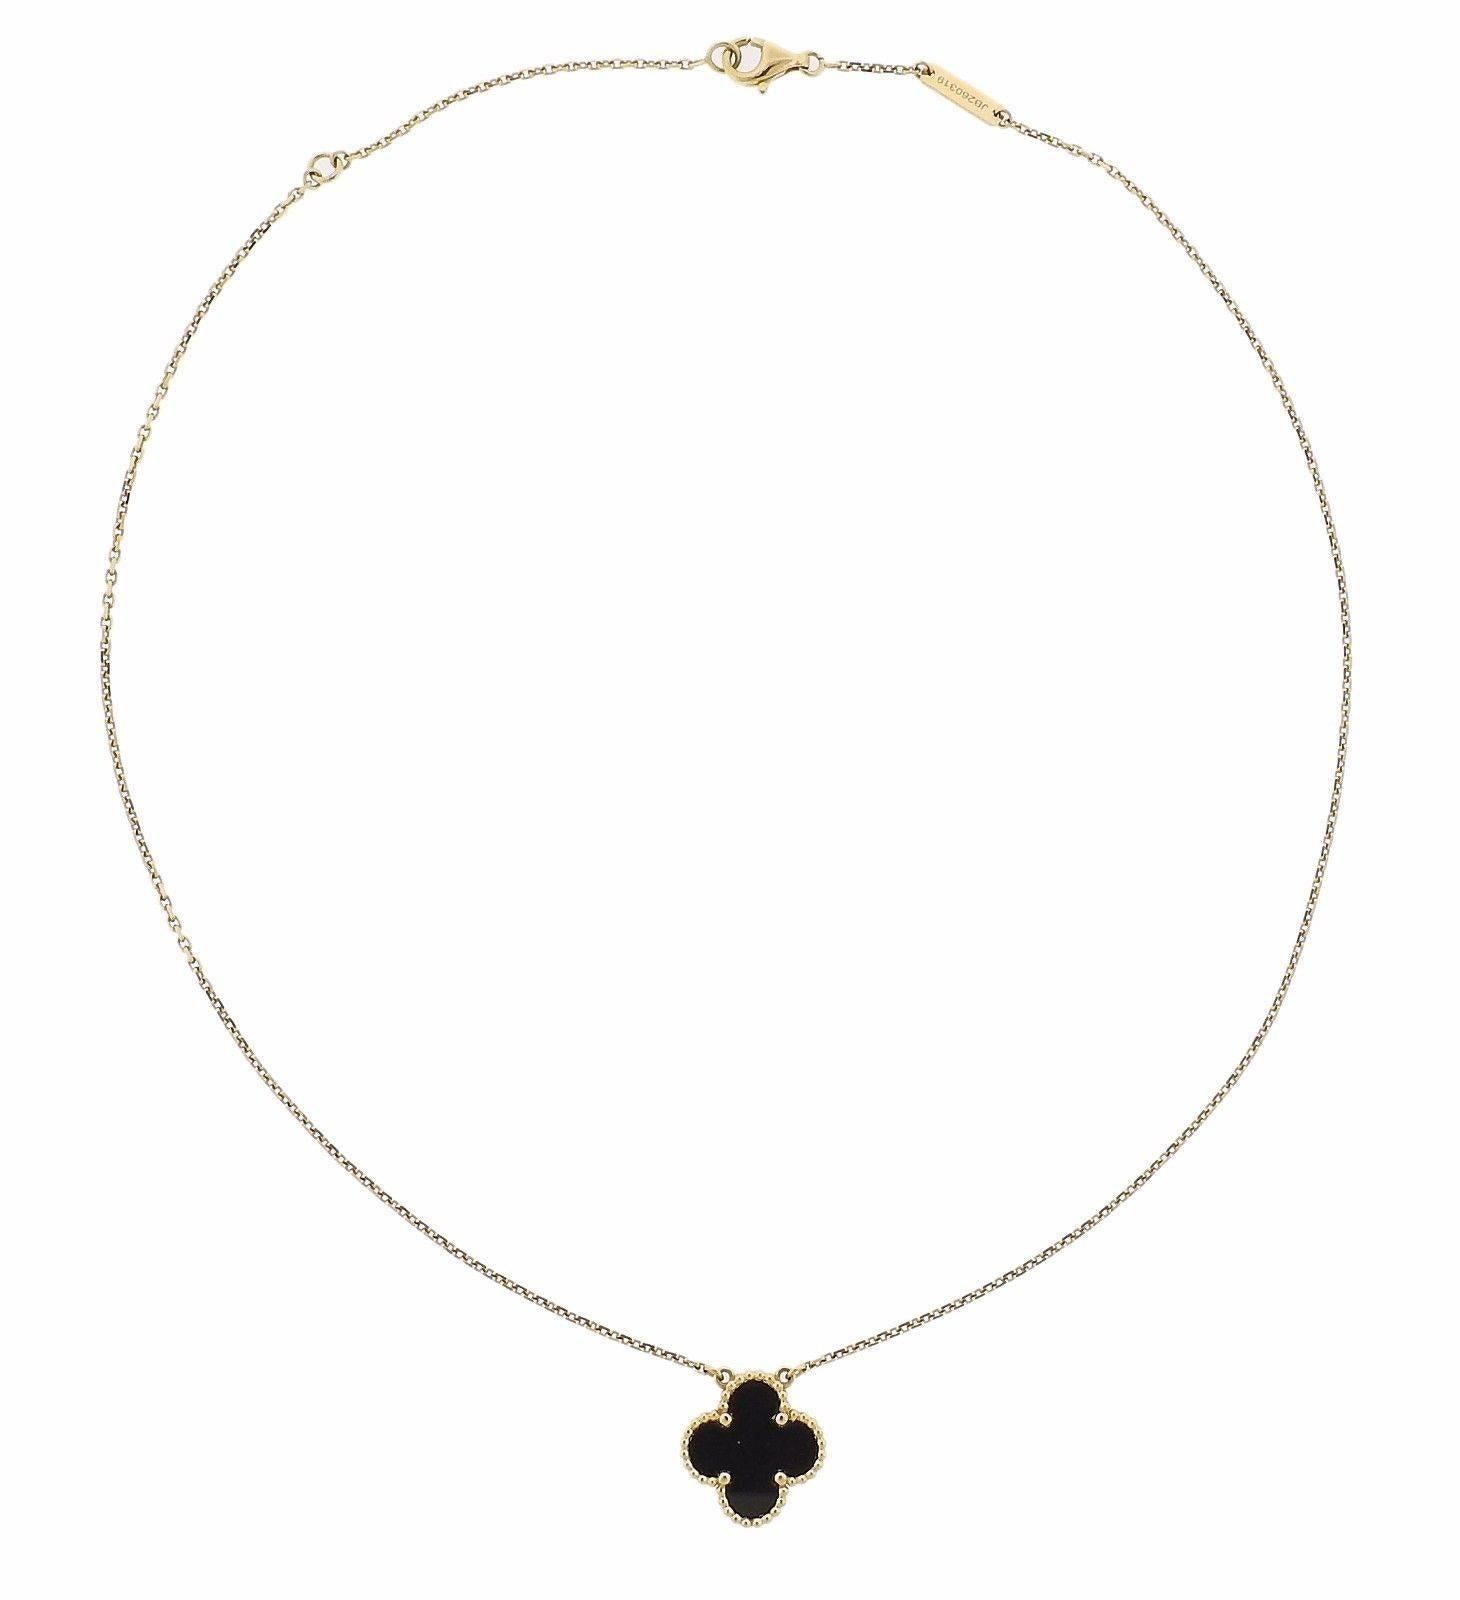 An 18k yellow gold necklace set with an onyx pendant.  The necklace is 15 1/2